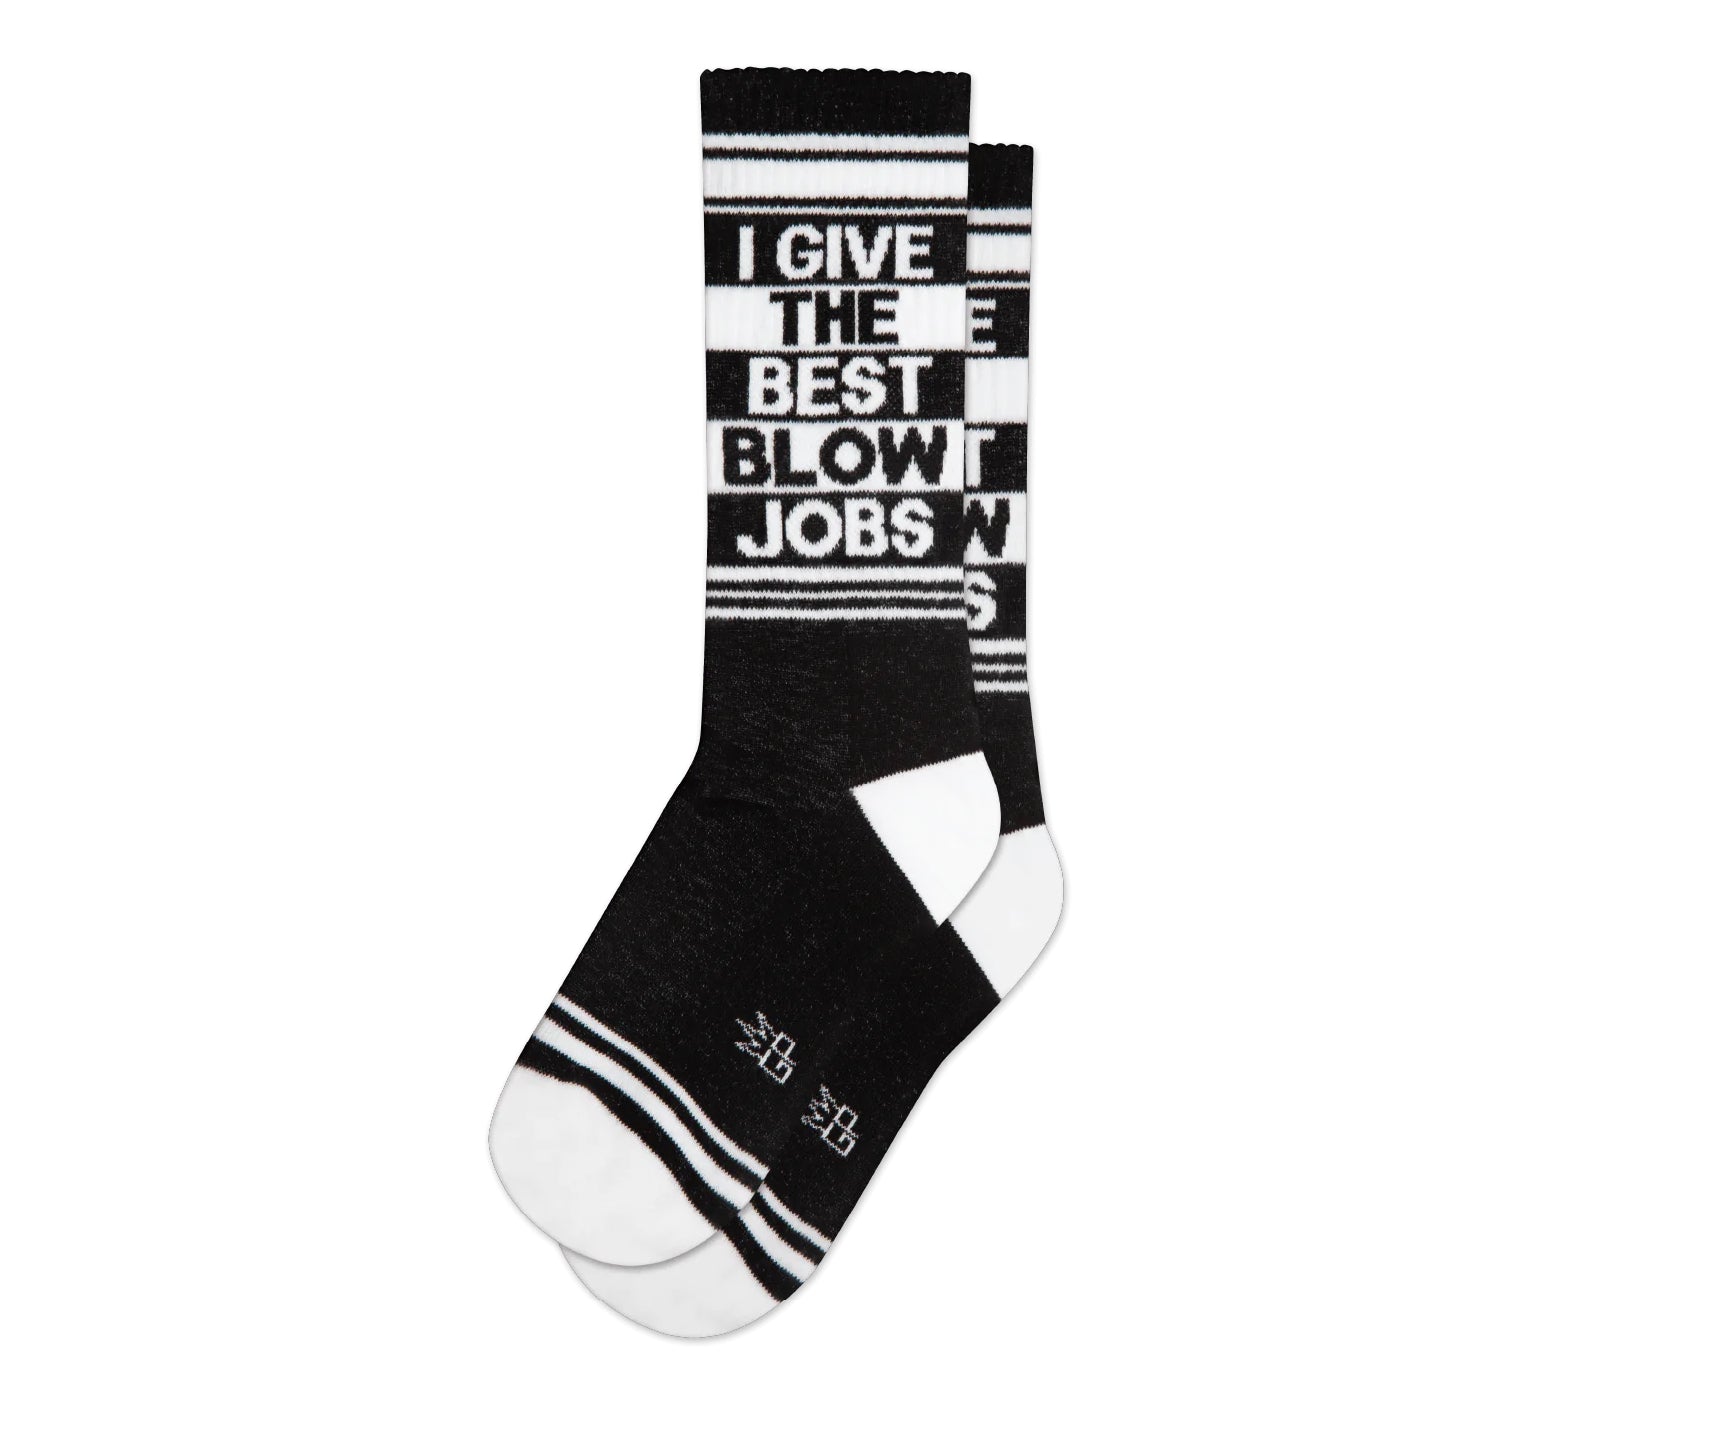 A pair of black and white crew socks that read "I give the best blow jobs" with the Gumball Poodle logo on the arch.